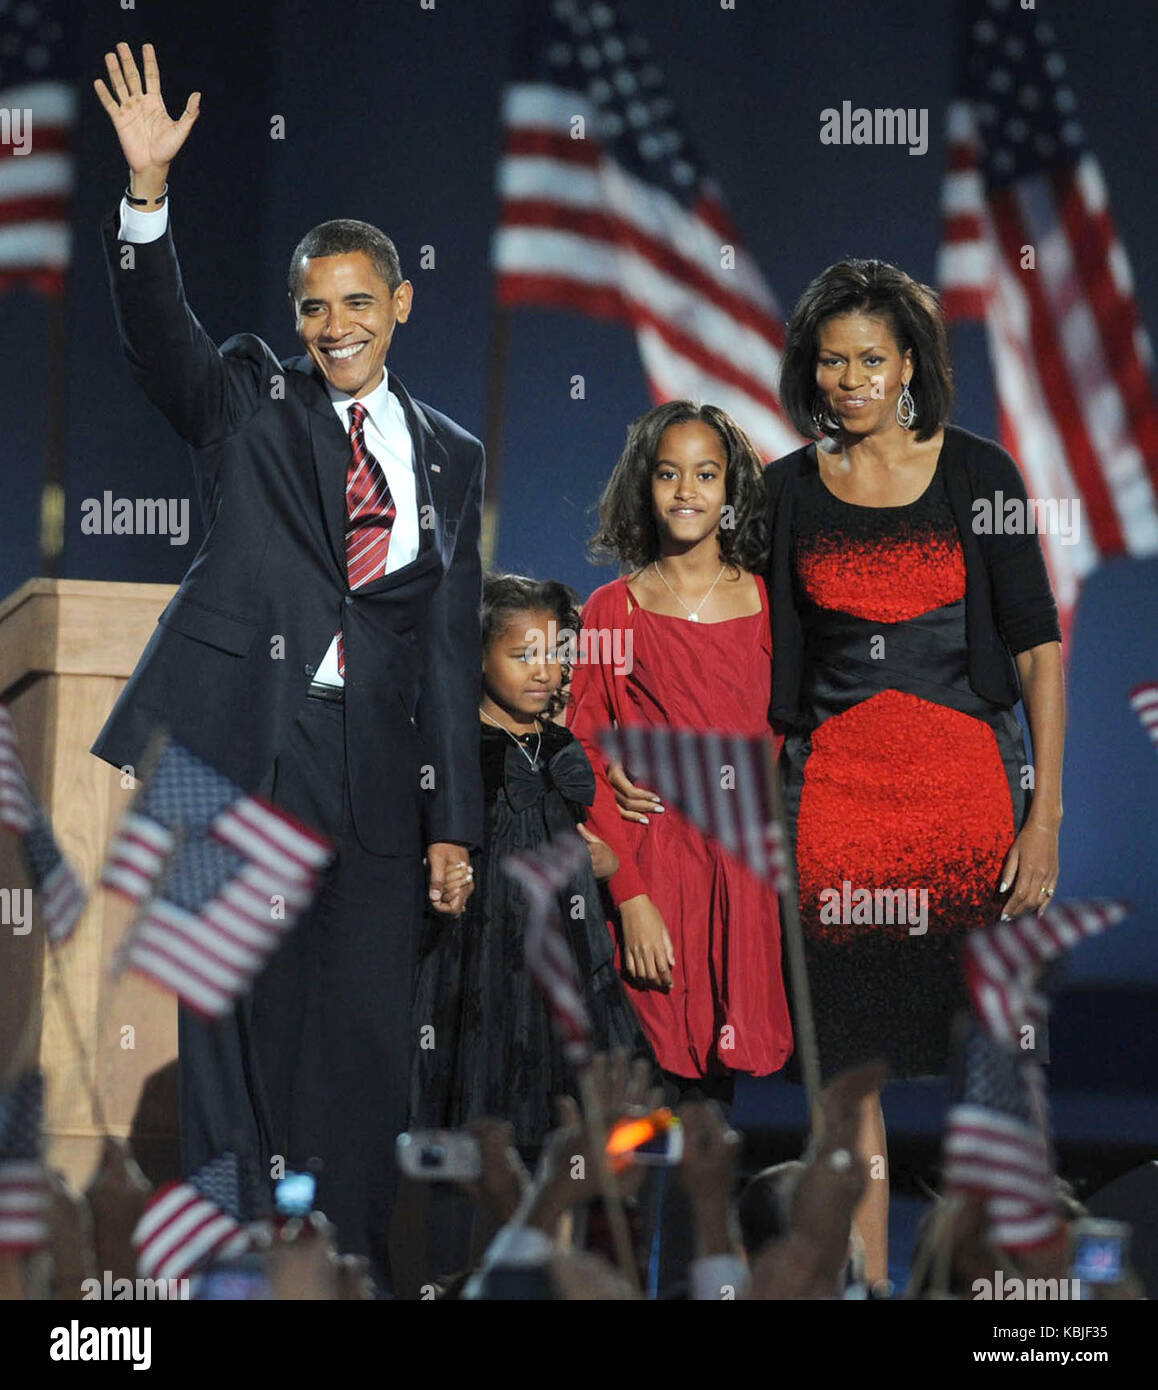 SMG NY1 Barack Obama President Elect 110408 19  CHICAGO- NOVEMBER 04;  Democratic presidential candidate Barack Obama and family stand on stage during his election night victory rally at Grant Park on November 4, 2008 in Chicago, Illinois. Americans emphatically elected Obama as their first black president in a transformational election which will reshape US politics and the US role on the world stage.    People:    Barack Obama, Michelle Obama,, and kids  Hoo-Me.com / MediaPunch Stock Photo